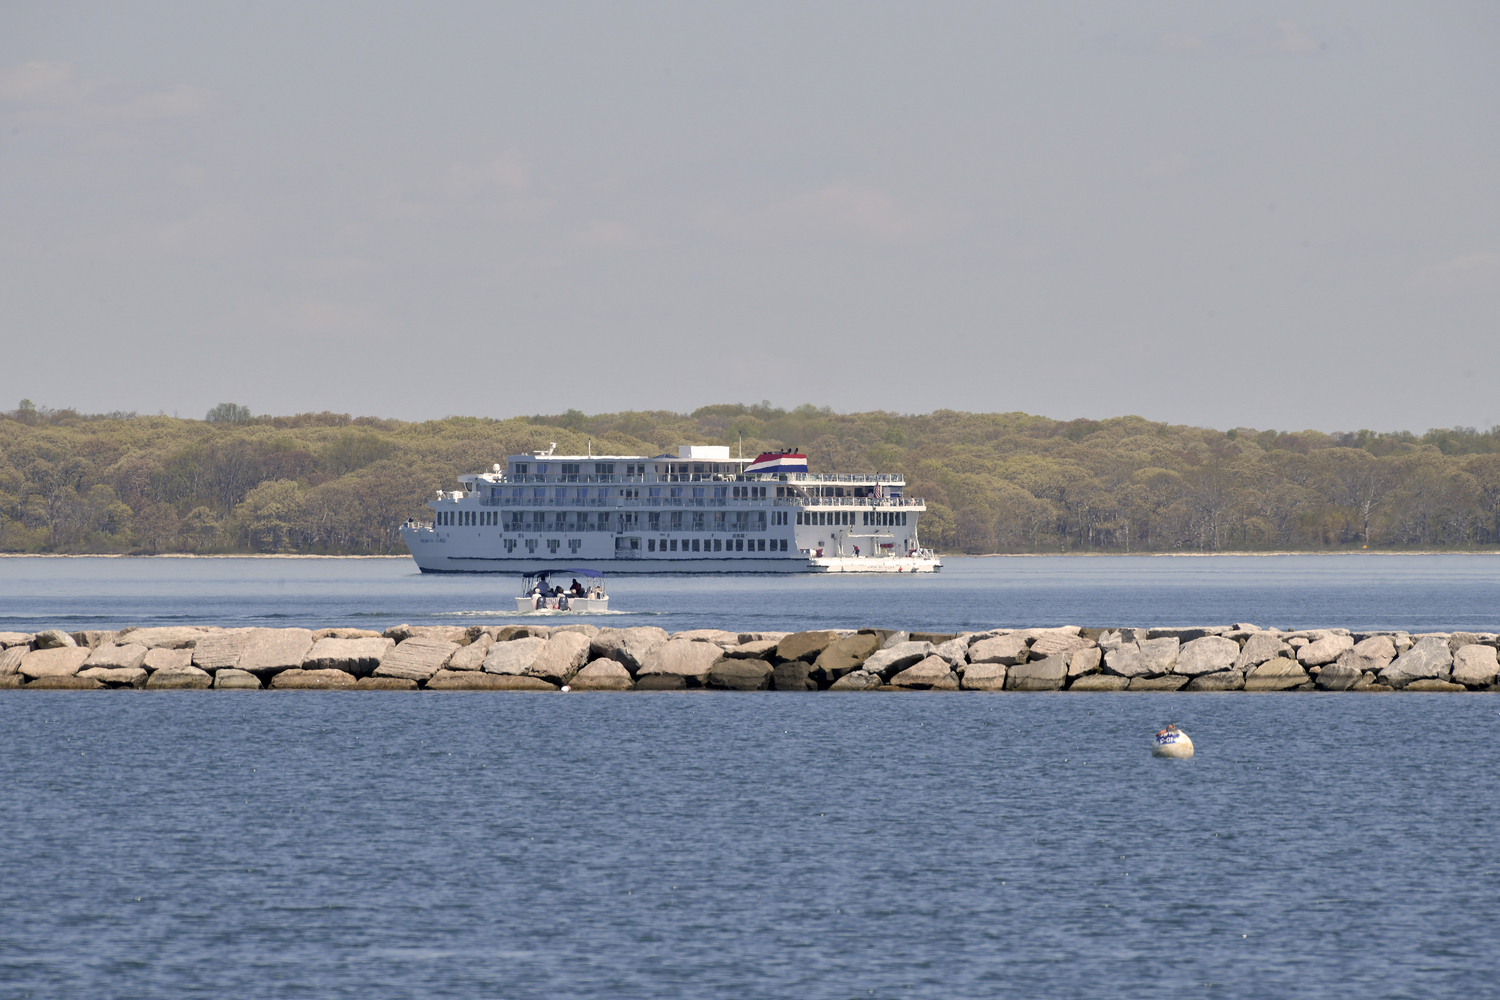 American Cruise Line passengers make their way back to their ship, anchored beyond the breakwater in Sag Harbor on Tuesday.   DANA SHAW